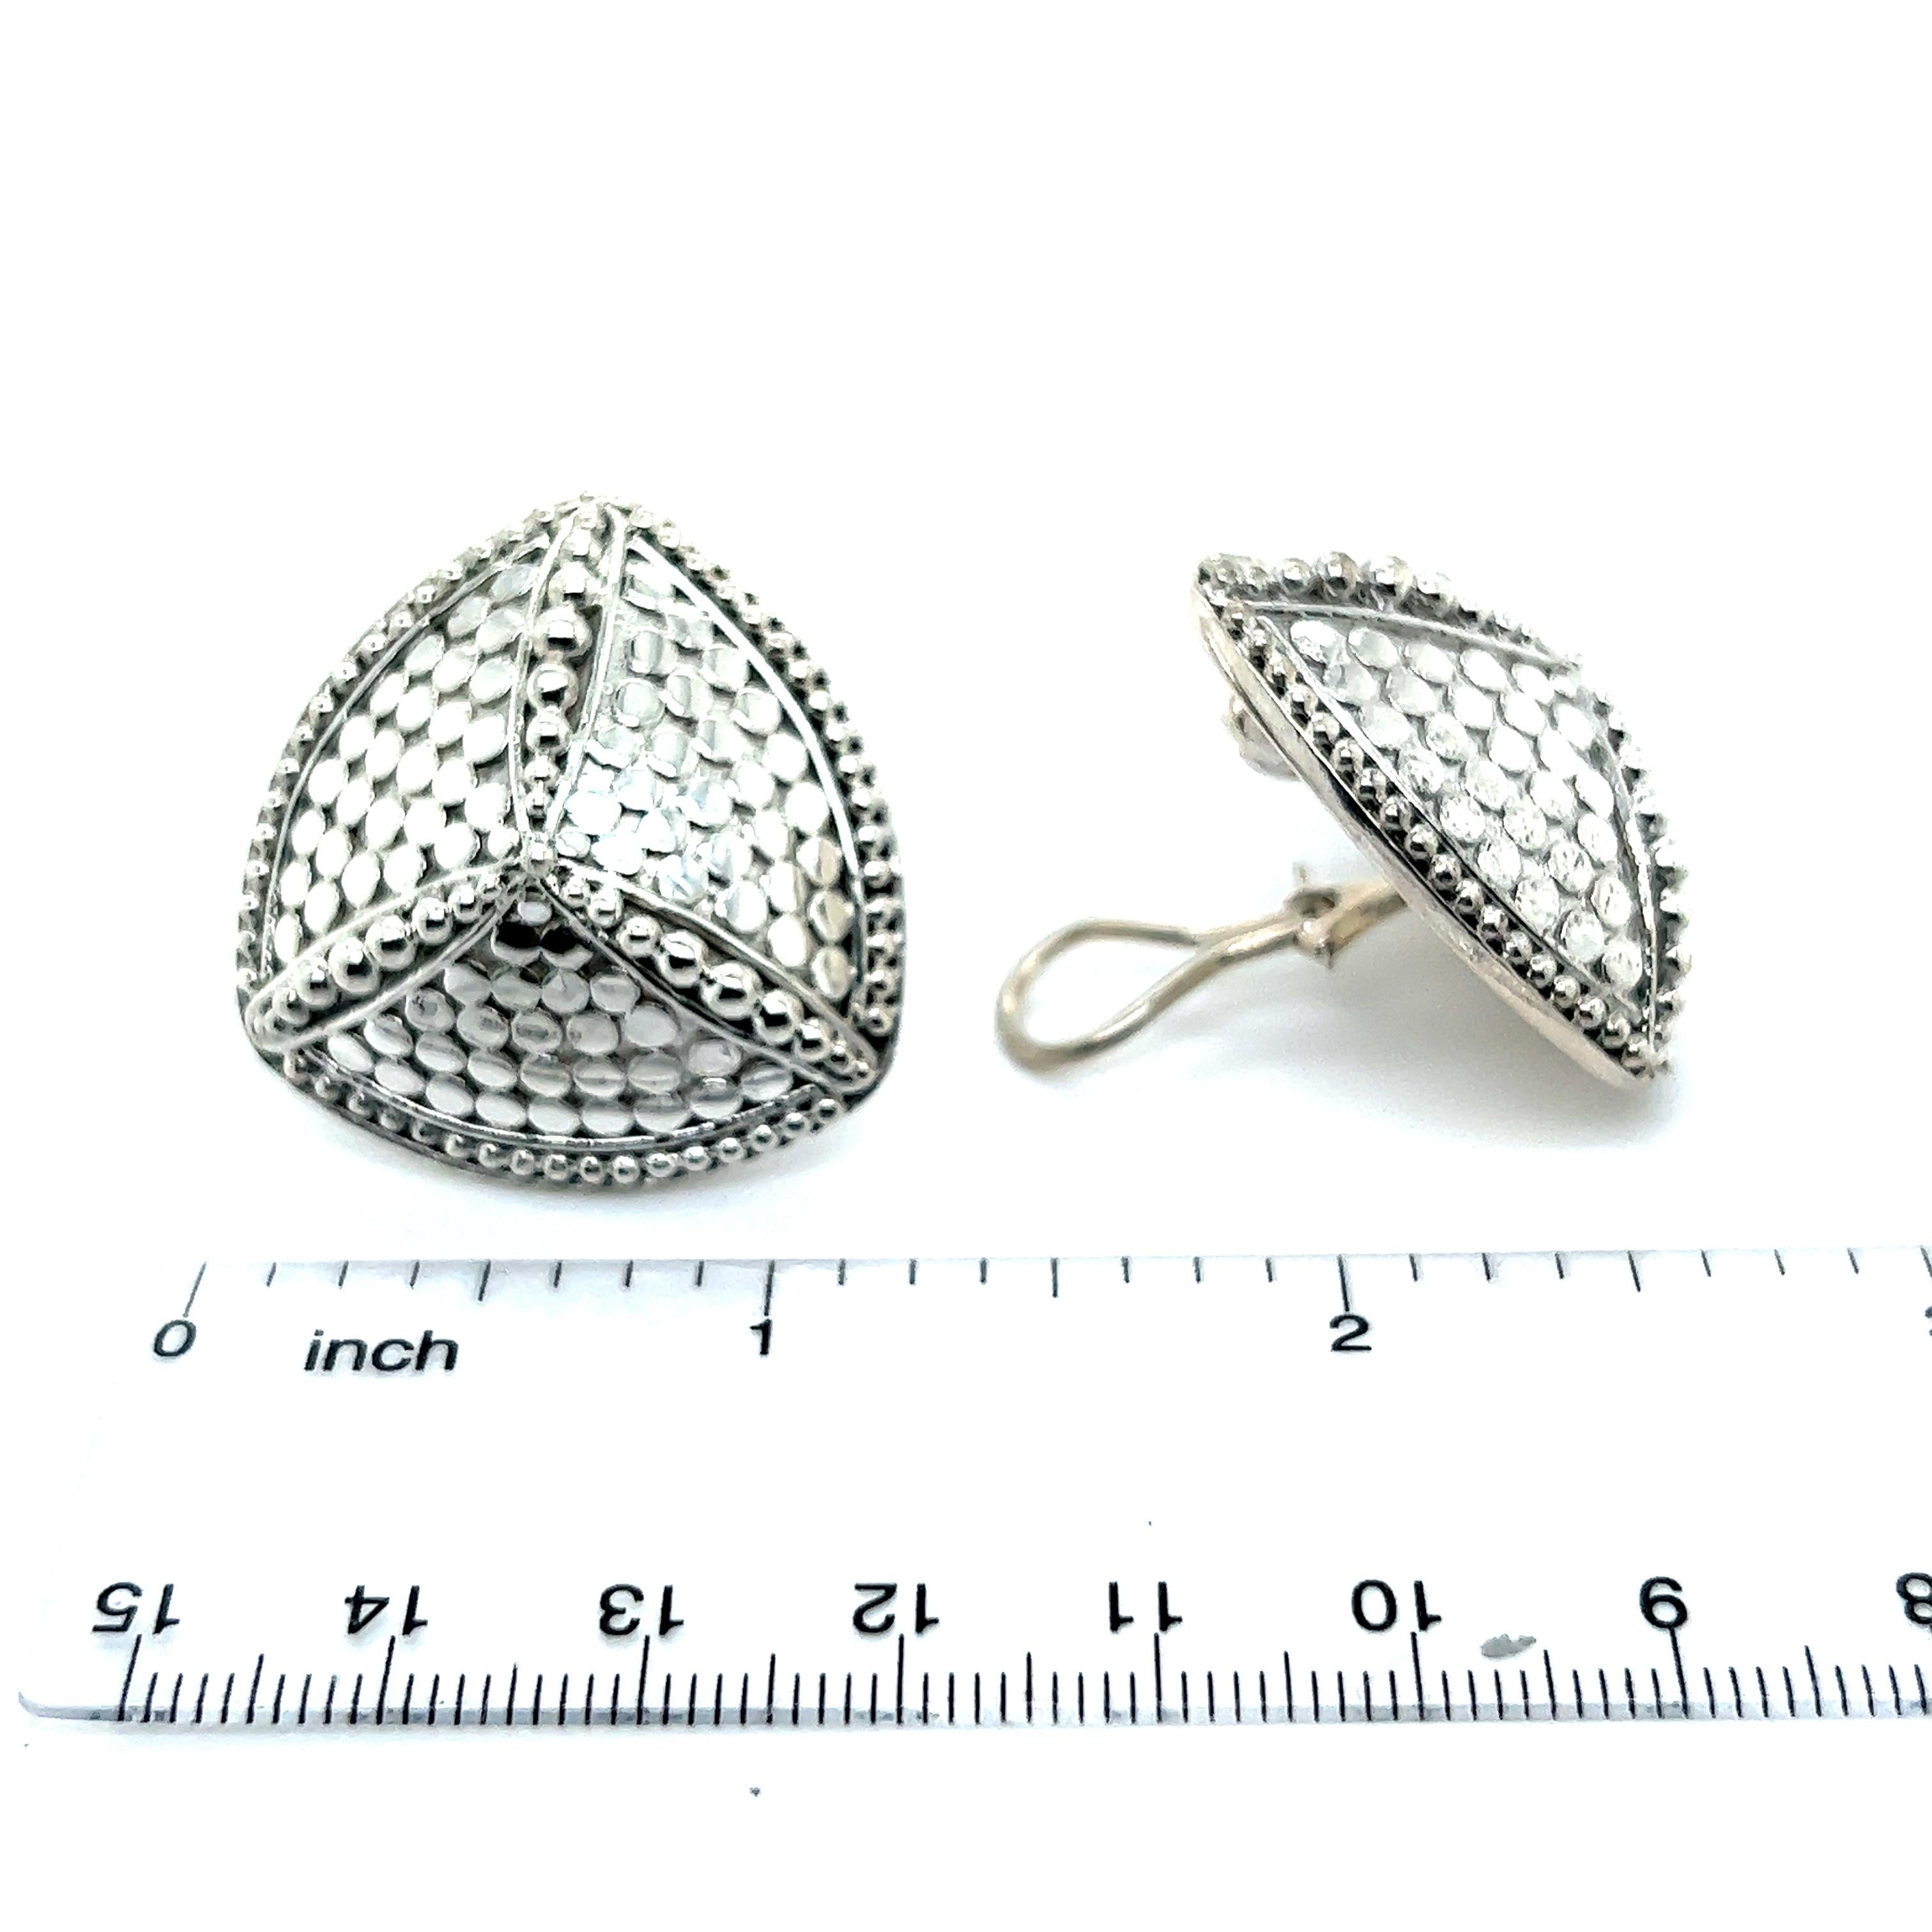 John Hardy Estate Clip-on Triangle Dot Earrings Silver JH50

TRUSTED SELLER SINCE 2002

PLEASE SEE OUR HUNDREDS OF POSITIVE FEEDBACKS FROM OUR CLIENTS!!

FREE SHIPPING!!

DETAILS
Style: Triangle Dot Earrings
Earrings: Clip-on
Weight: 27 Grams
Metal: